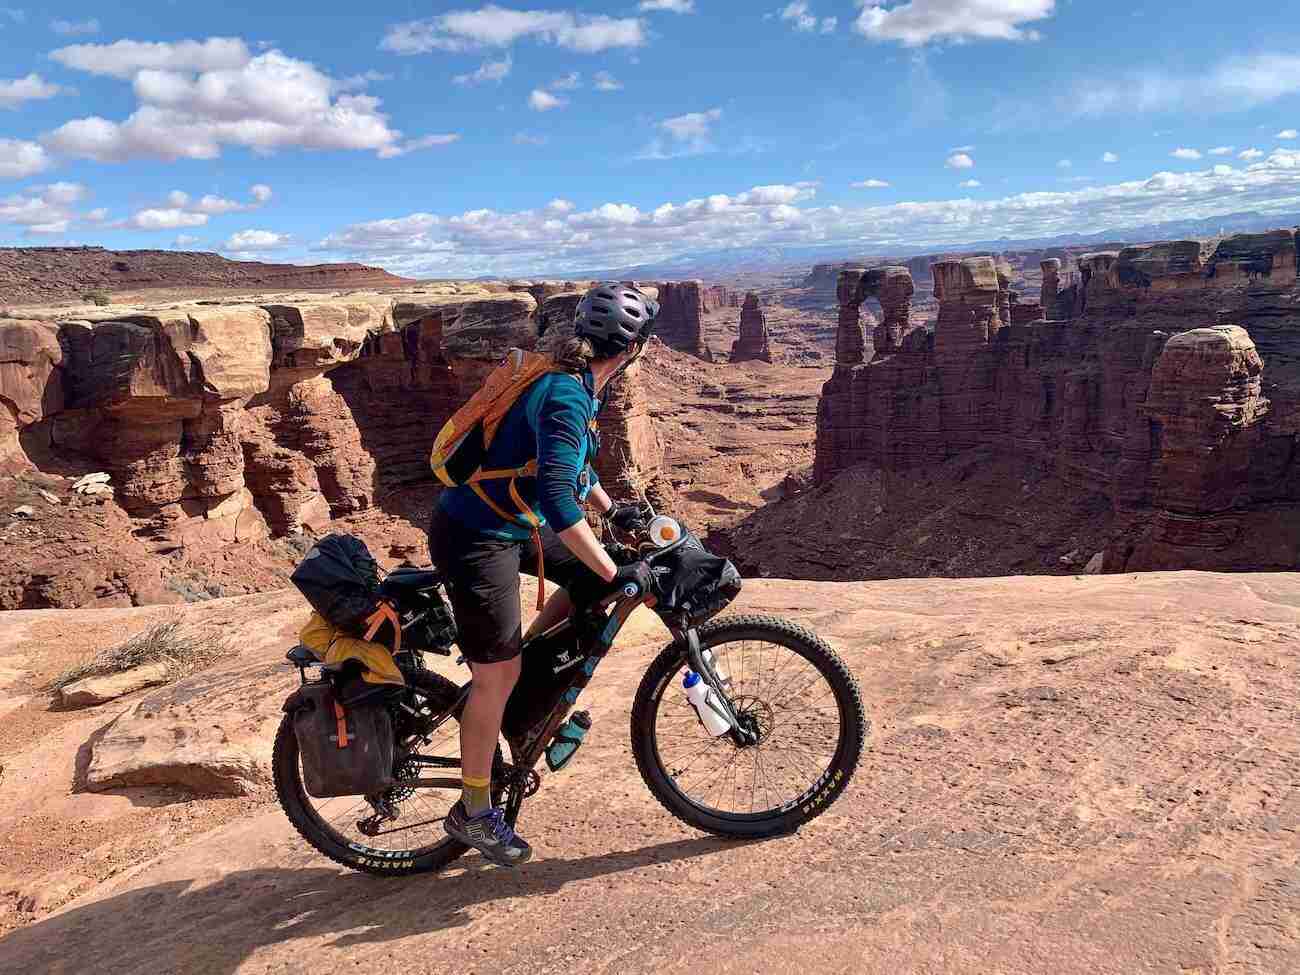 Wondering where to bike in Utah? In this post, I've rounded up the best Utah bike trails for bikepackers, mountain bikers, & cyclists.